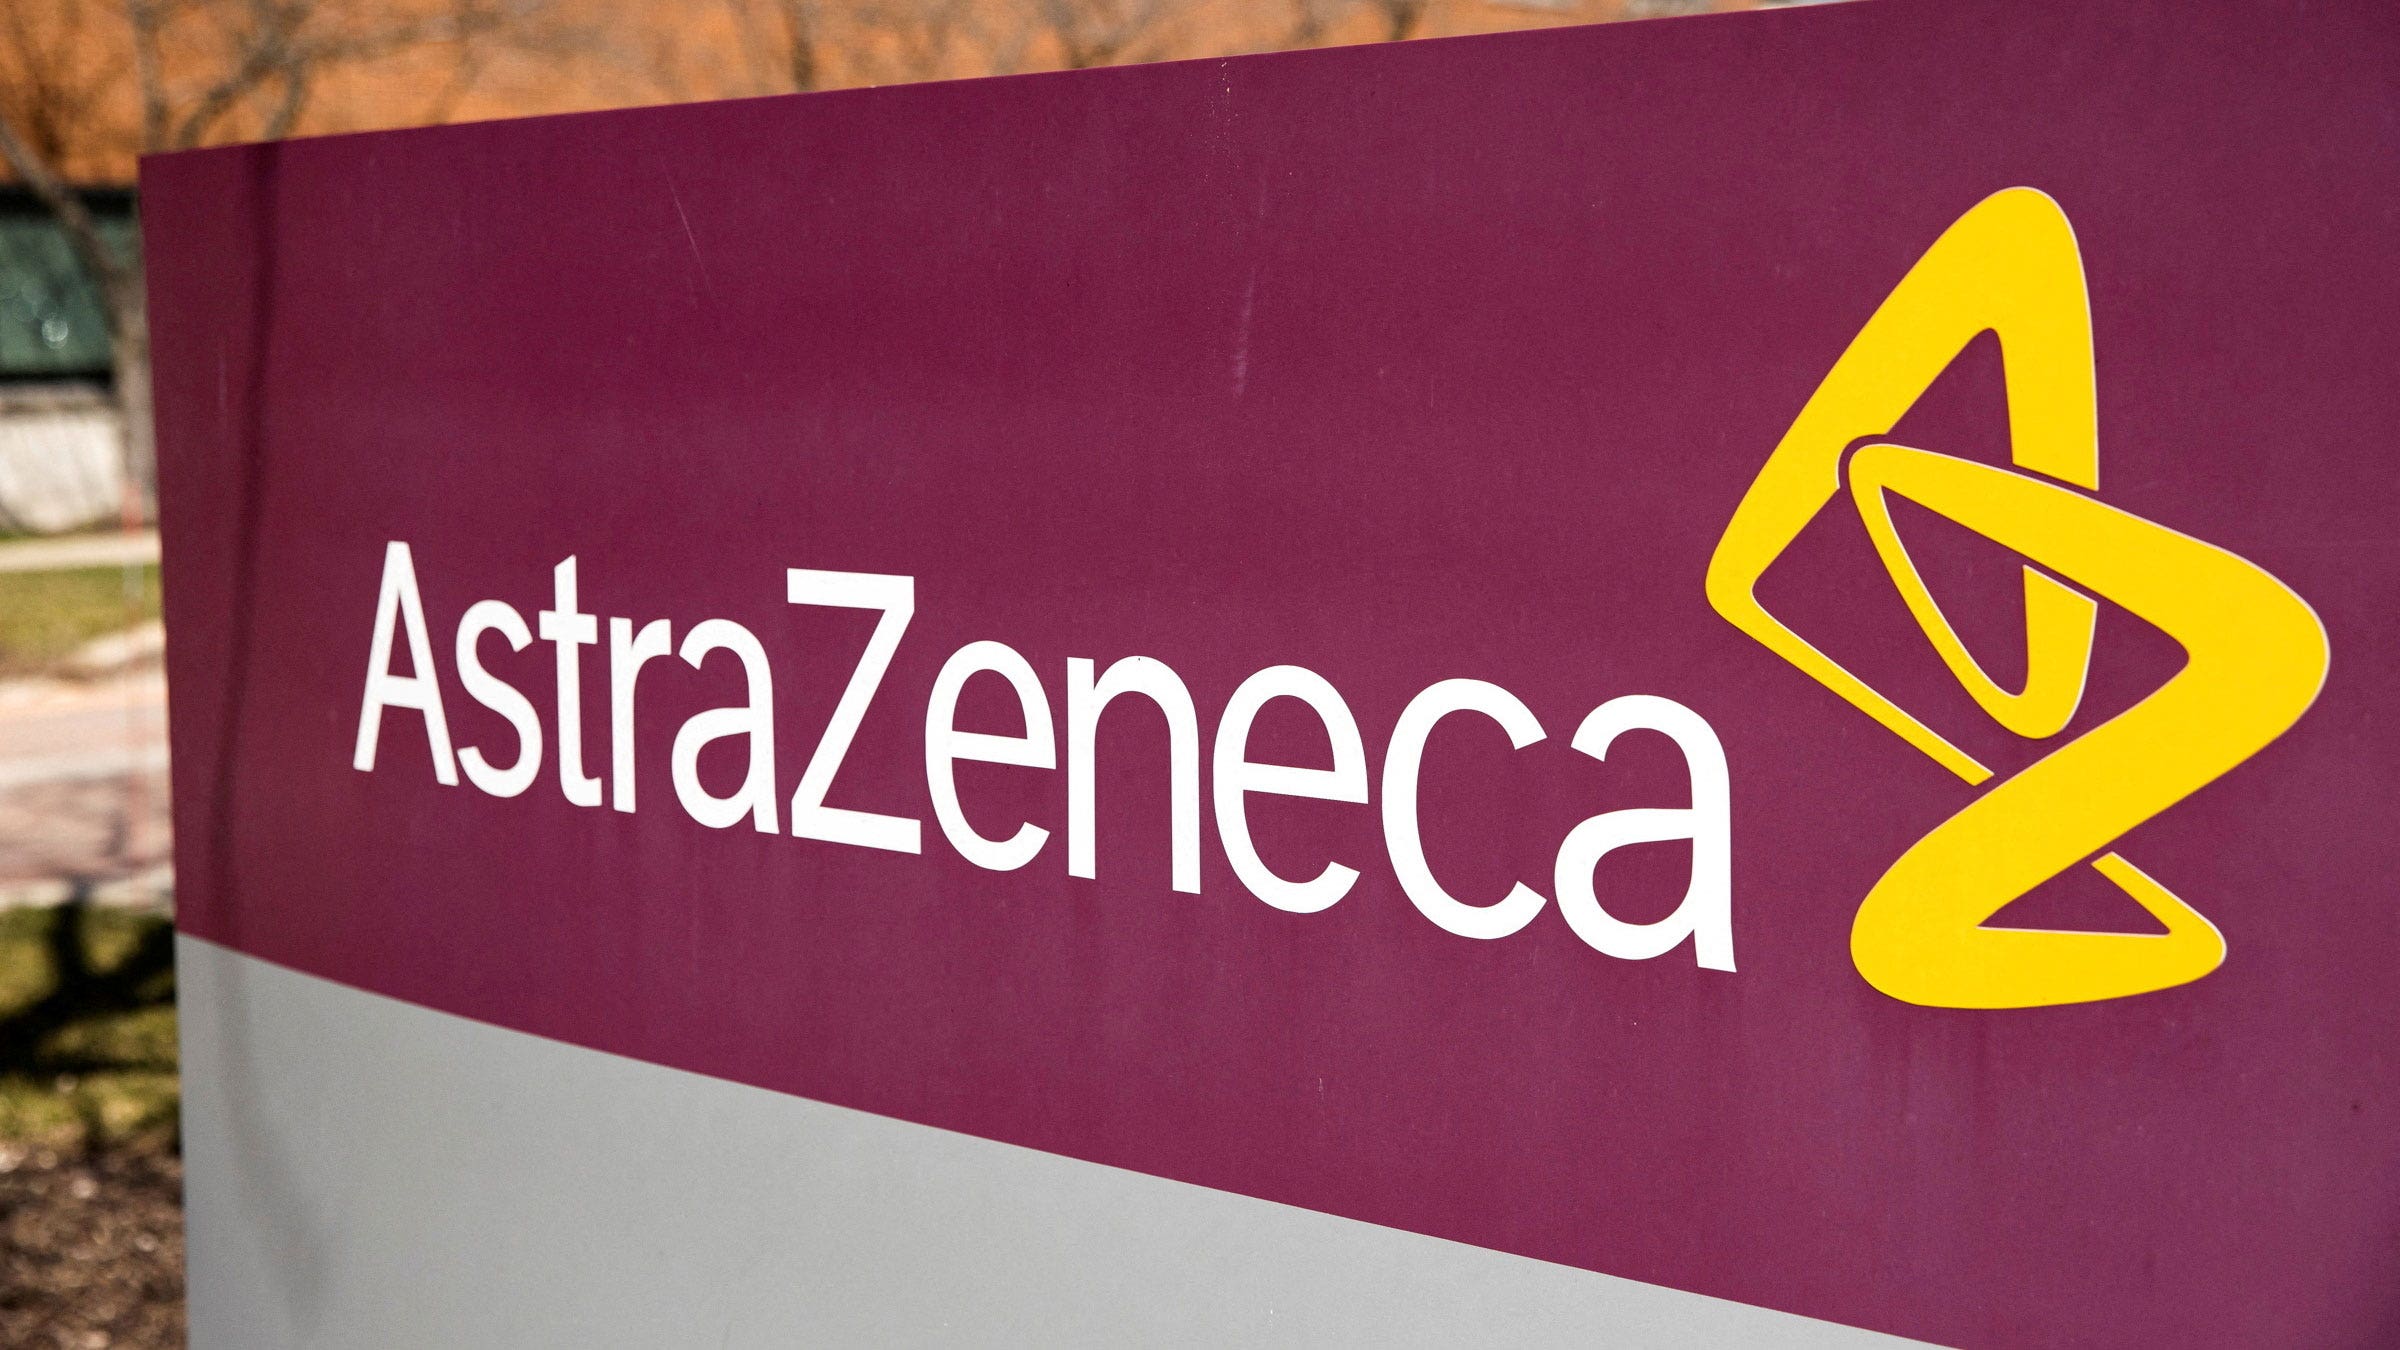 AstraZeneca gets EU backing for targeted breast cancer therapies